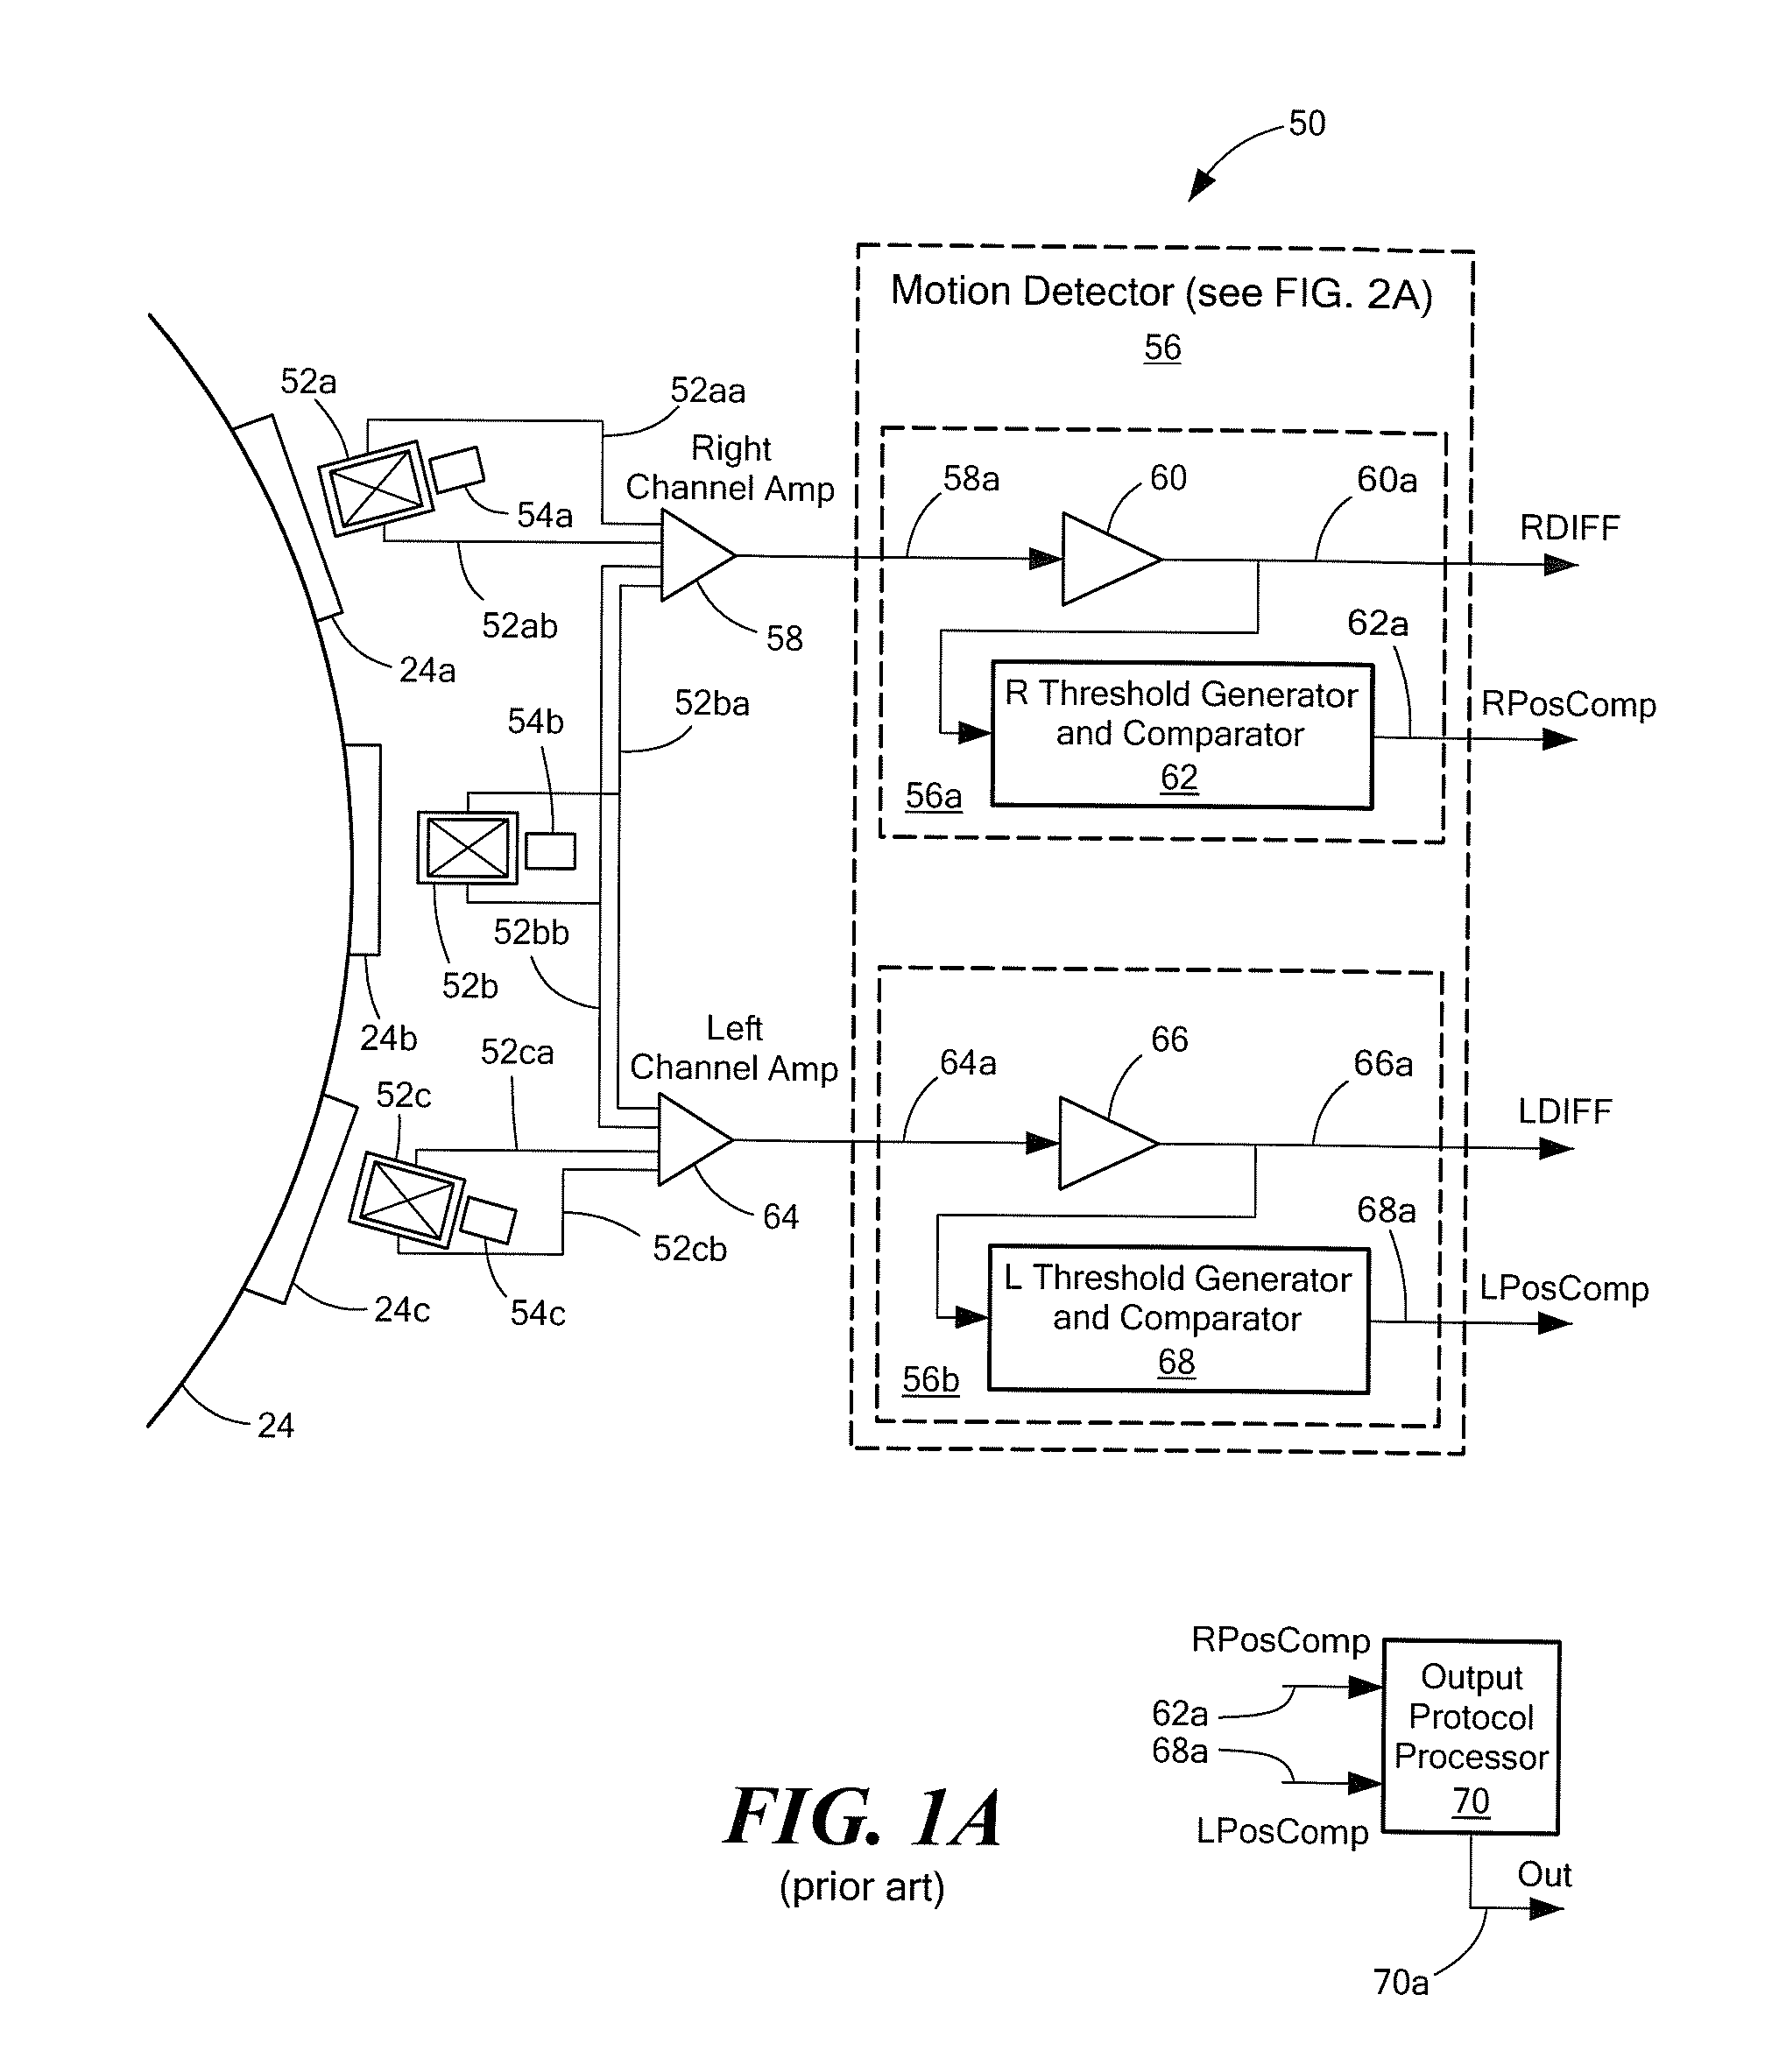 Circuits and Methods for Generating a Threshold Signal Used in a Motion Detector